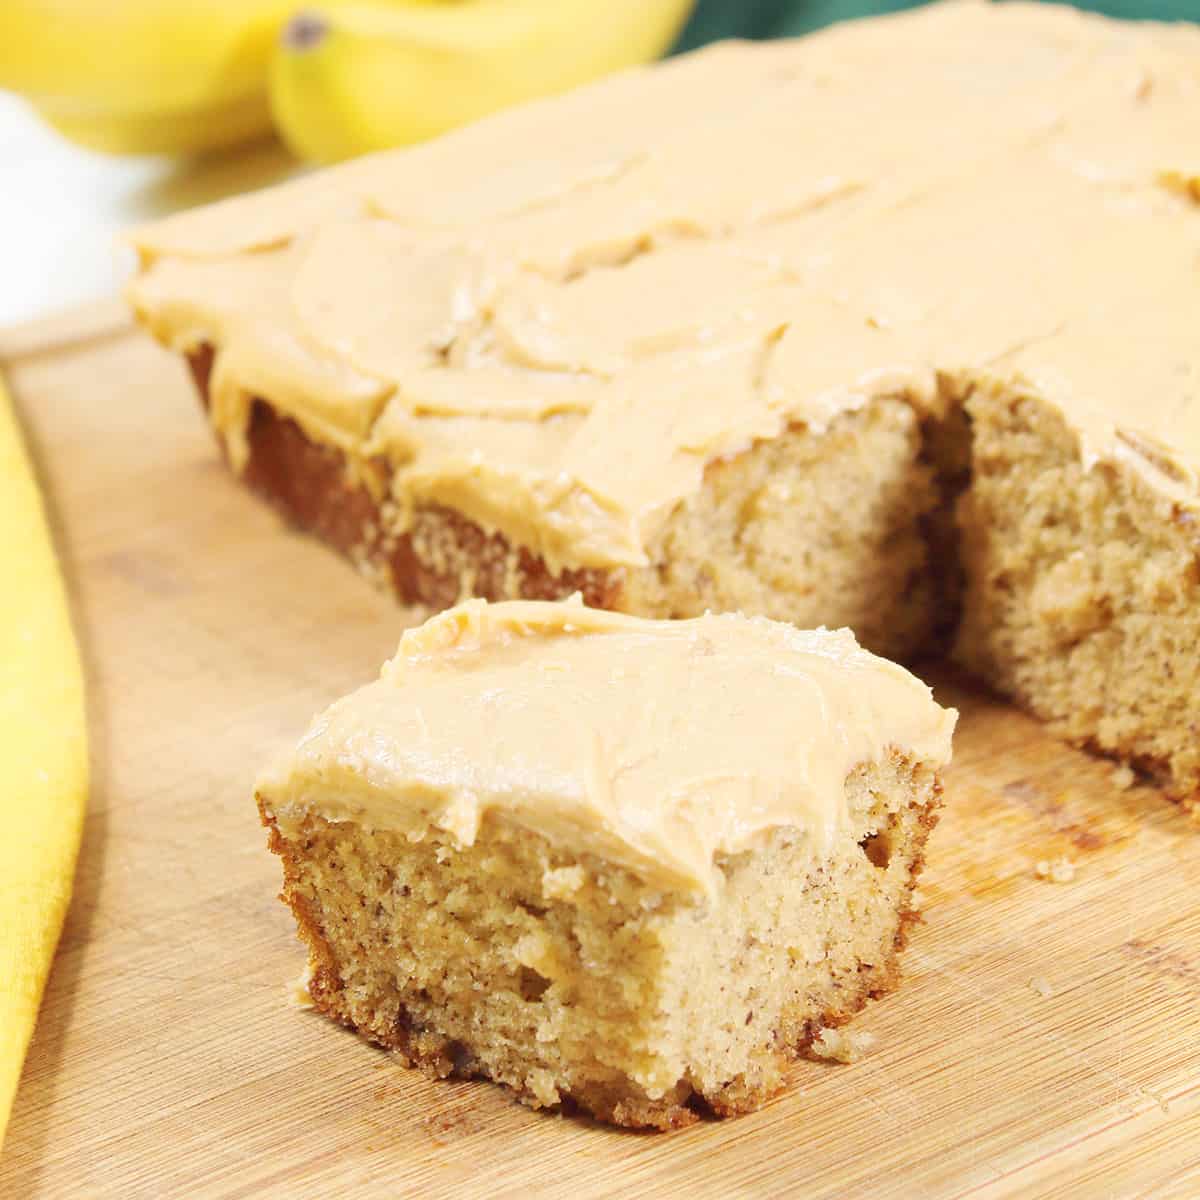 Piece of snack cake covered with peanut butter frosting.